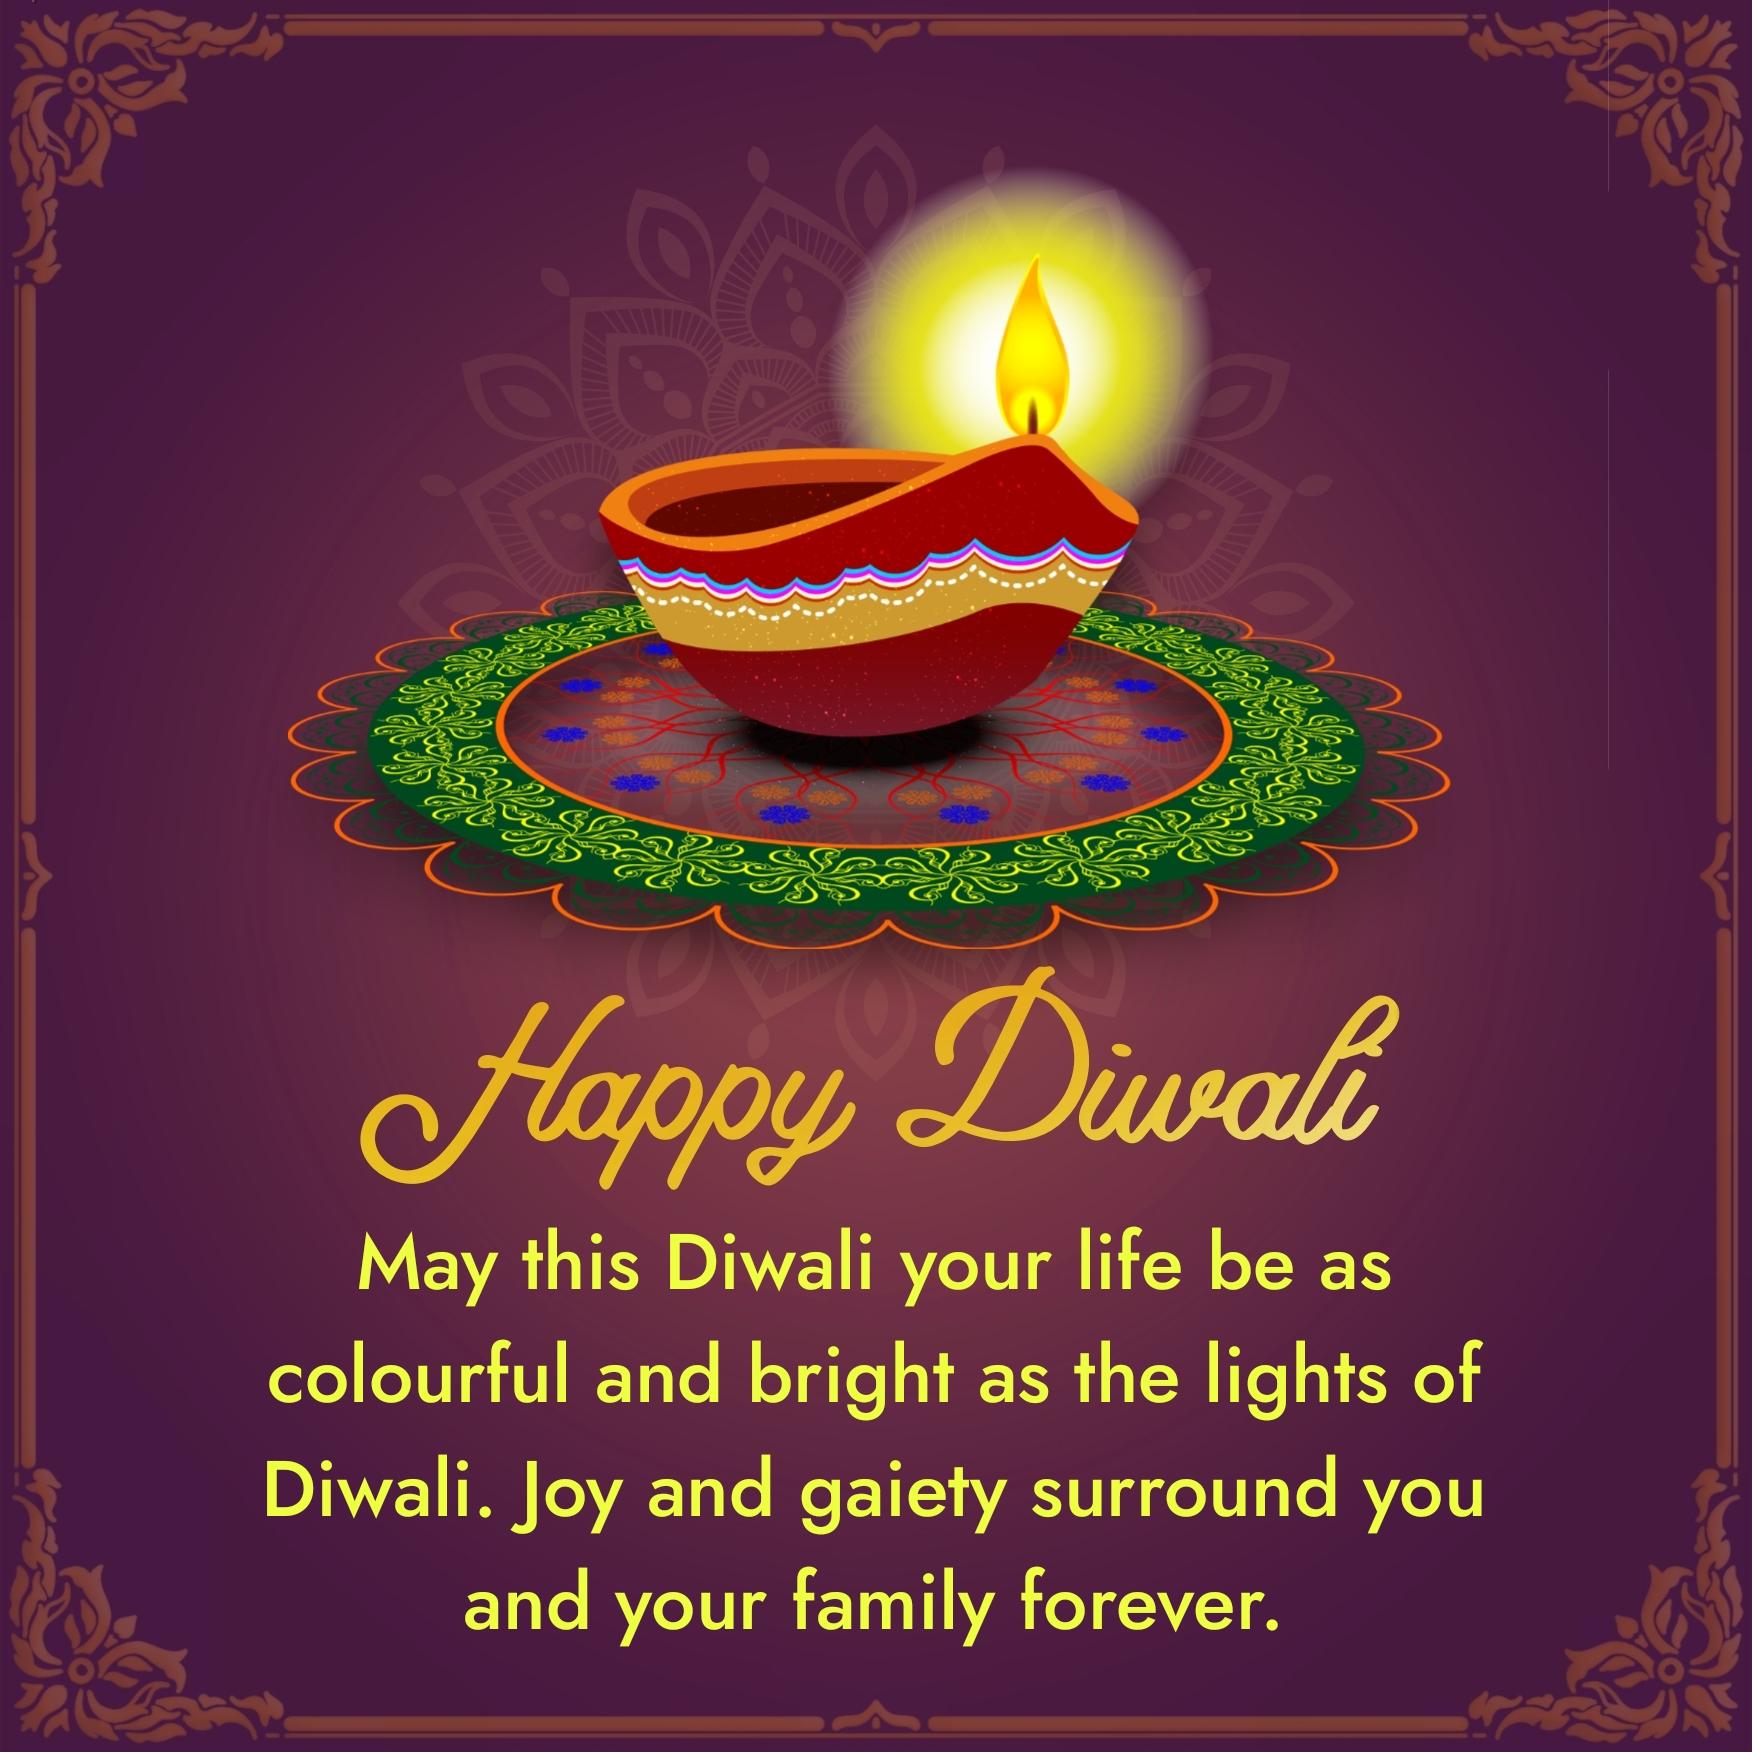 May this Diwali your life be as colourful and bright as the lights